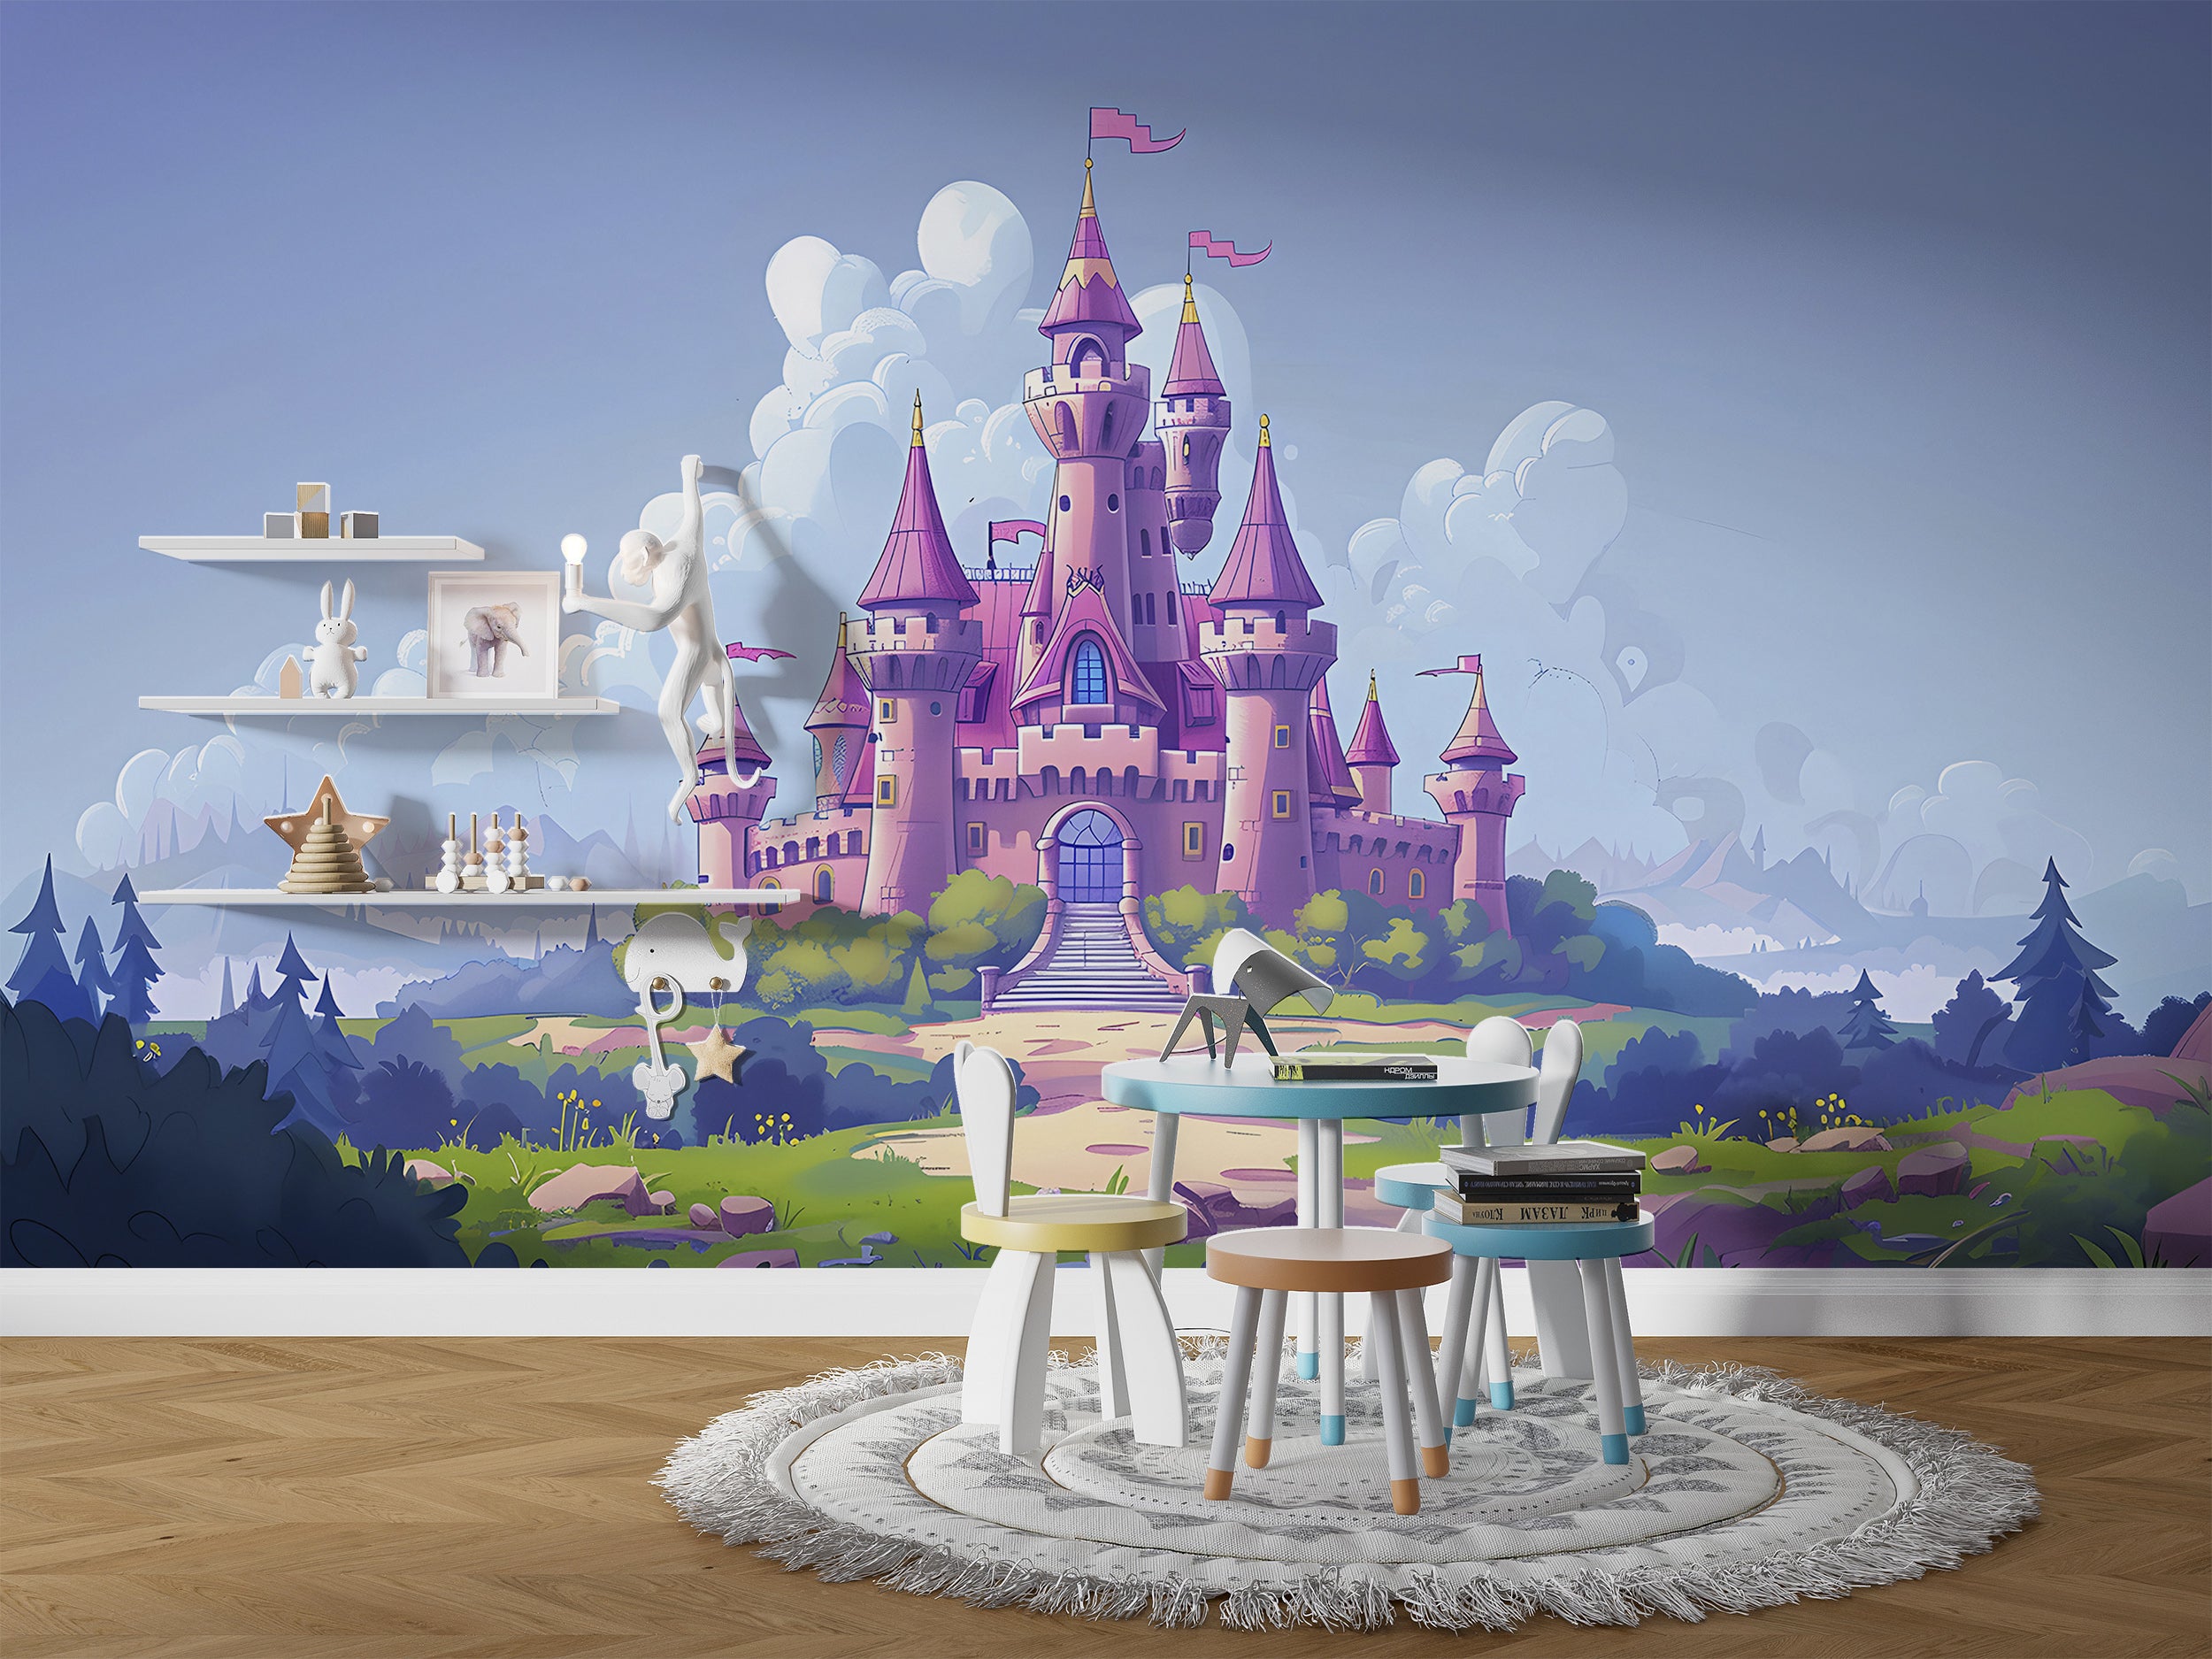 Pink Princess Castle Mural, Peel and Stick Nursery Dreamy Castle Wallpaper, Cartoon Style Kids Room Colorful Castle, PVC free Removable Decal